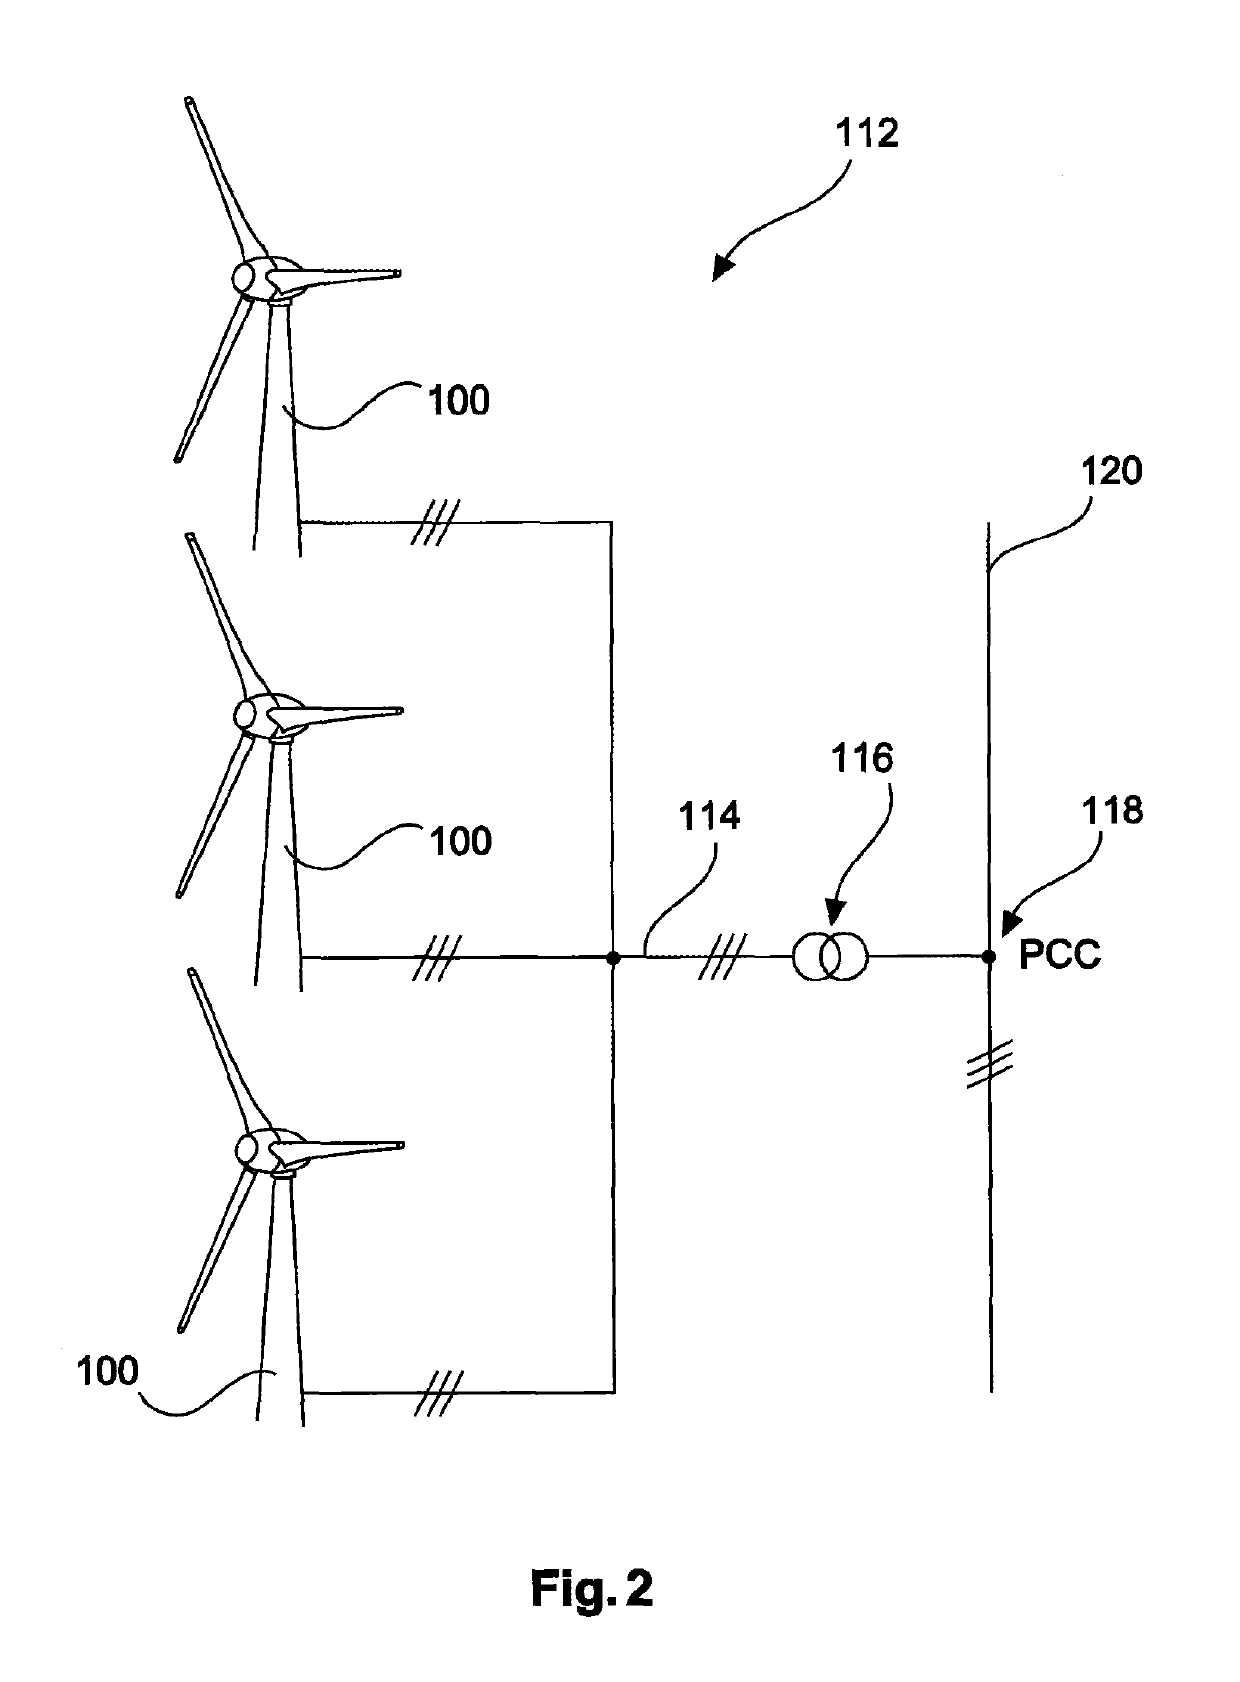 Method for controlling wind turbines